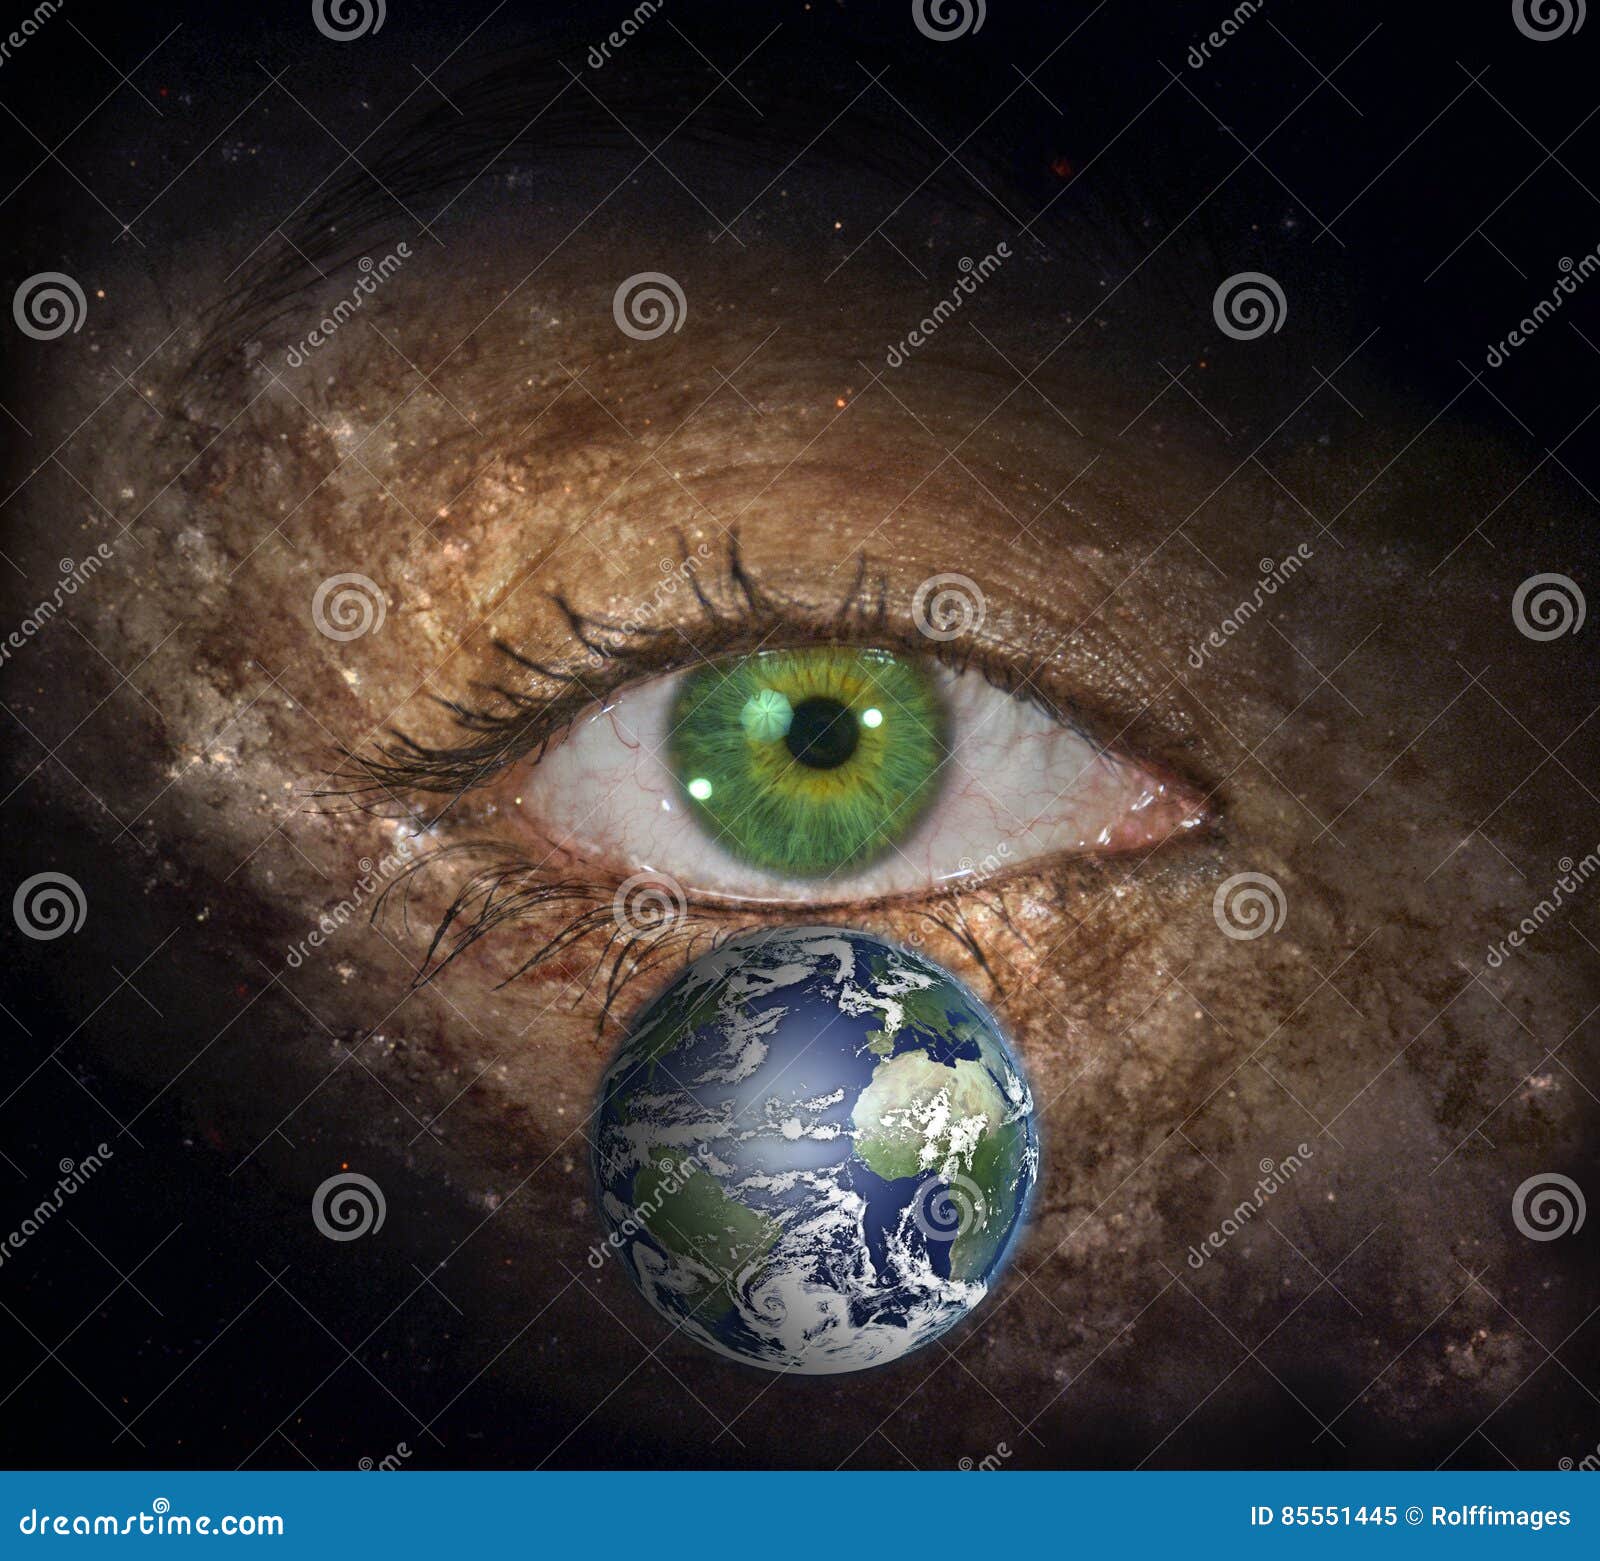 eye in midst of galaxy with earth